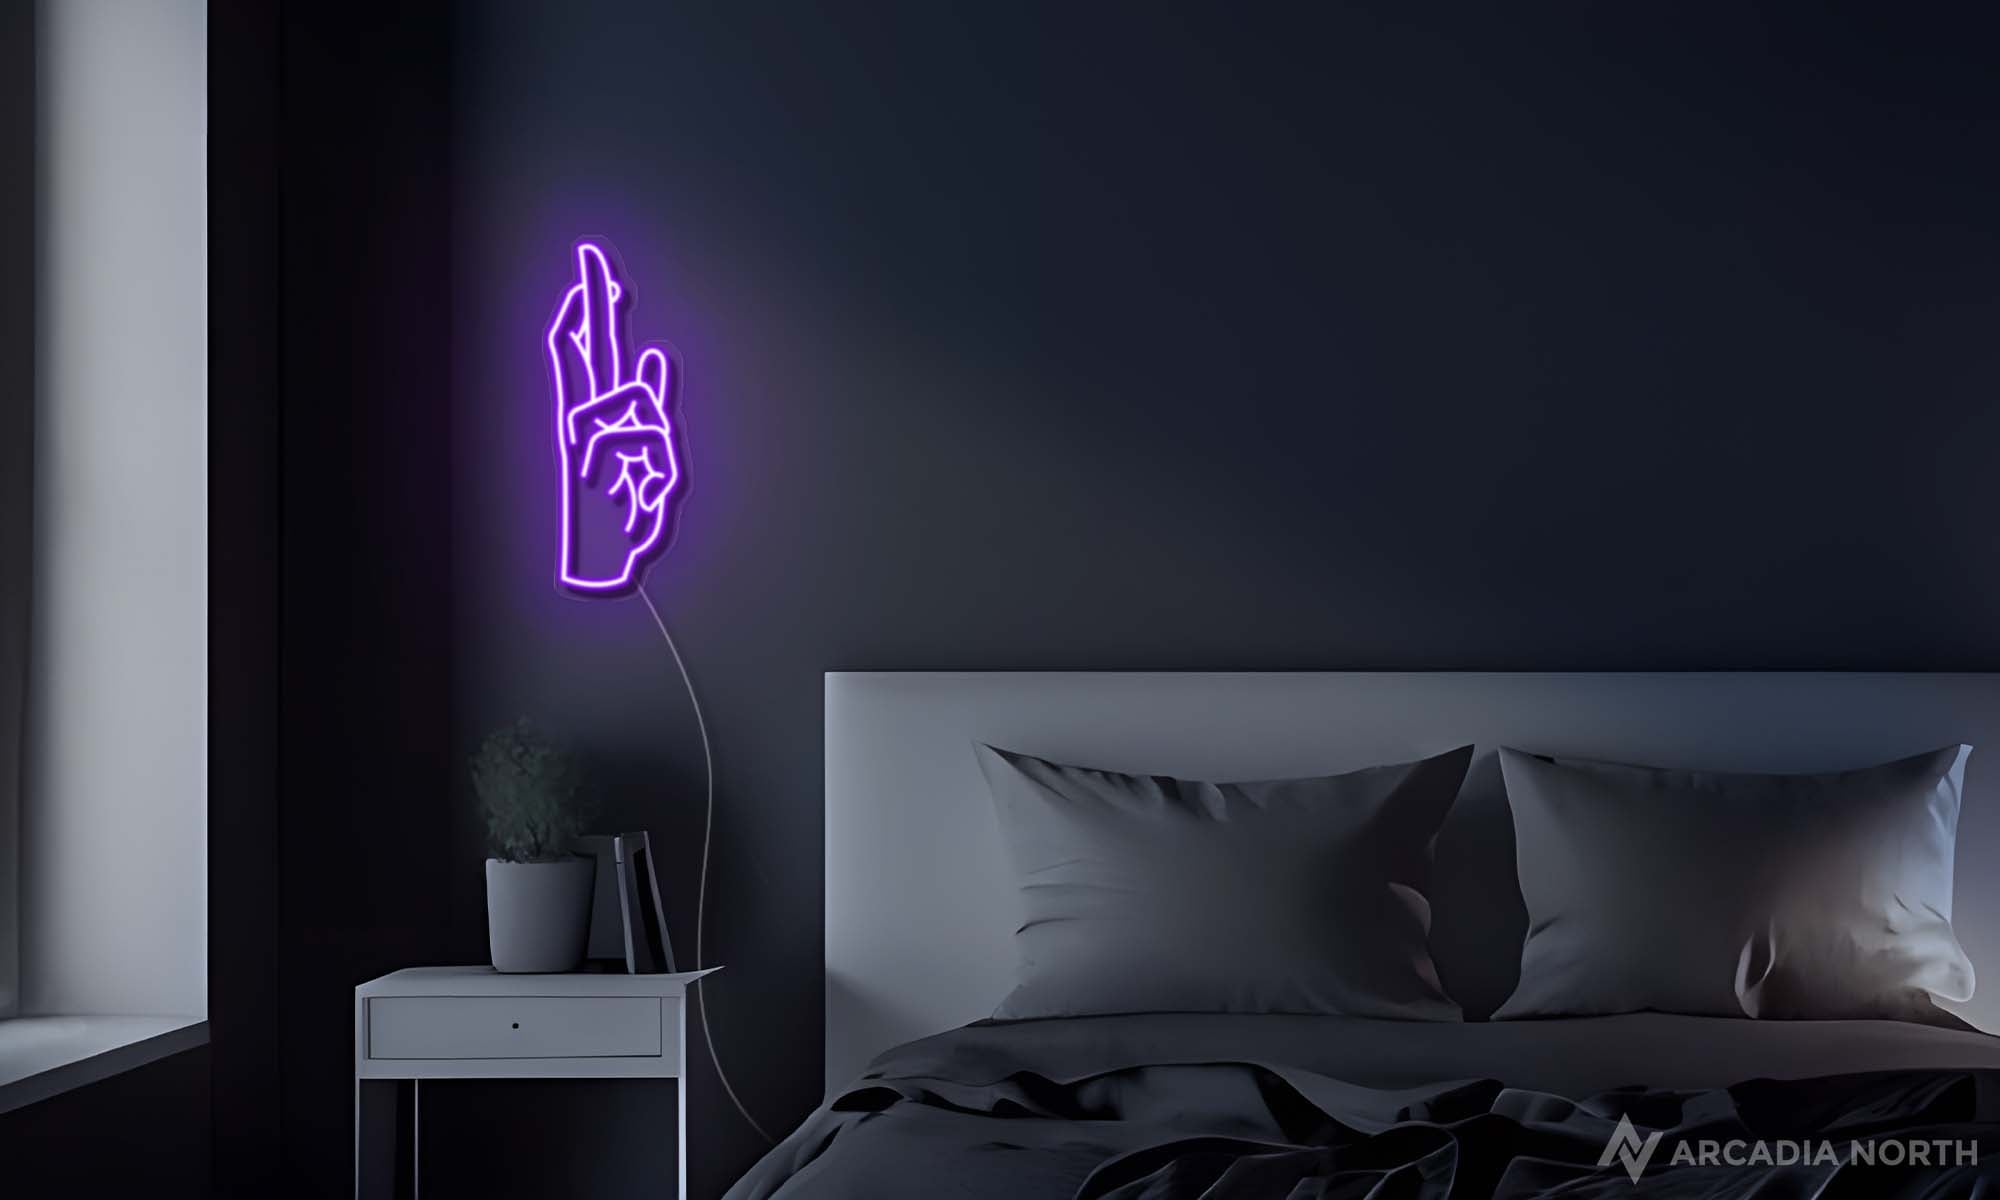 Modern bedroom with a purple Jujutsu Kaisen anime Gojo Infinite Void hand symbol neon sign glowing on the wall above the bedside table